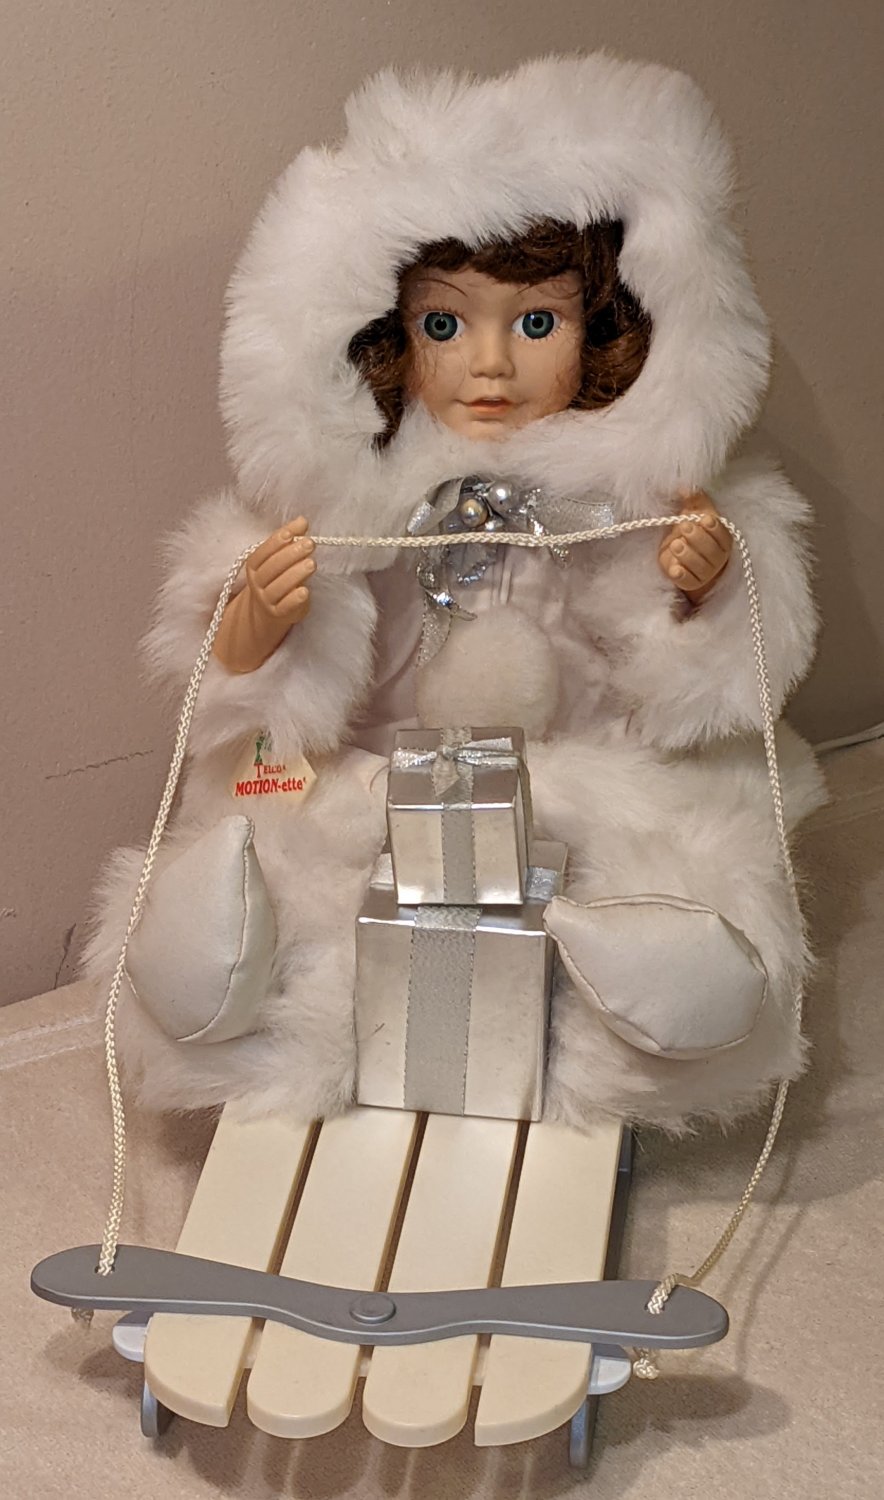 Telco Christmas Silver Sleigh Sled Ride Motion-ettes Animated Display Figure Porcelite Doll 1995